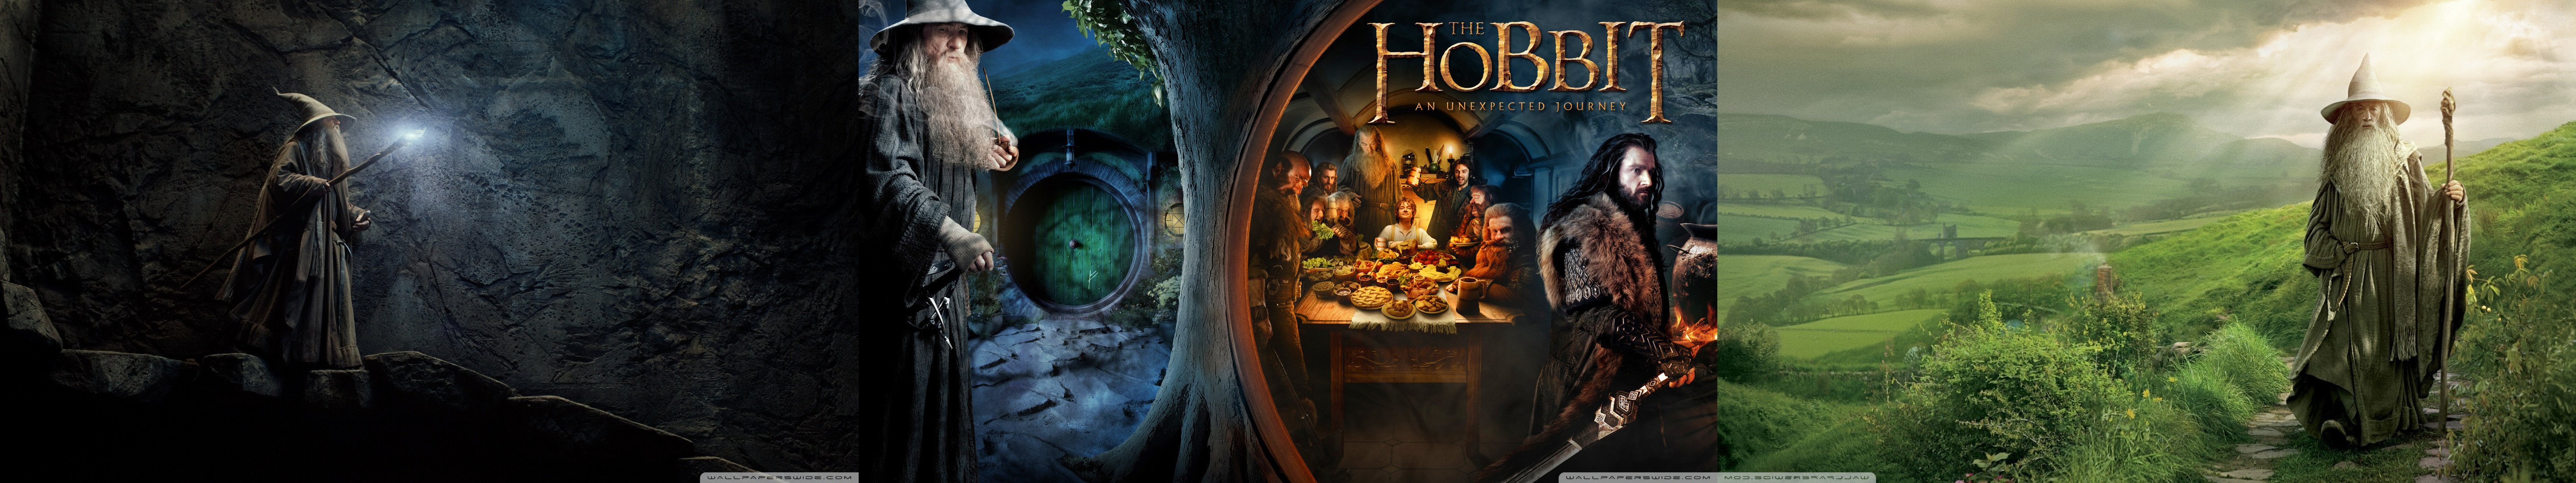 triple, Monitor, Multiple, Screen, Multi, Hobbit, Lord, Of, The, Ring, Seigneur, Des, Anneaux Wallpaper